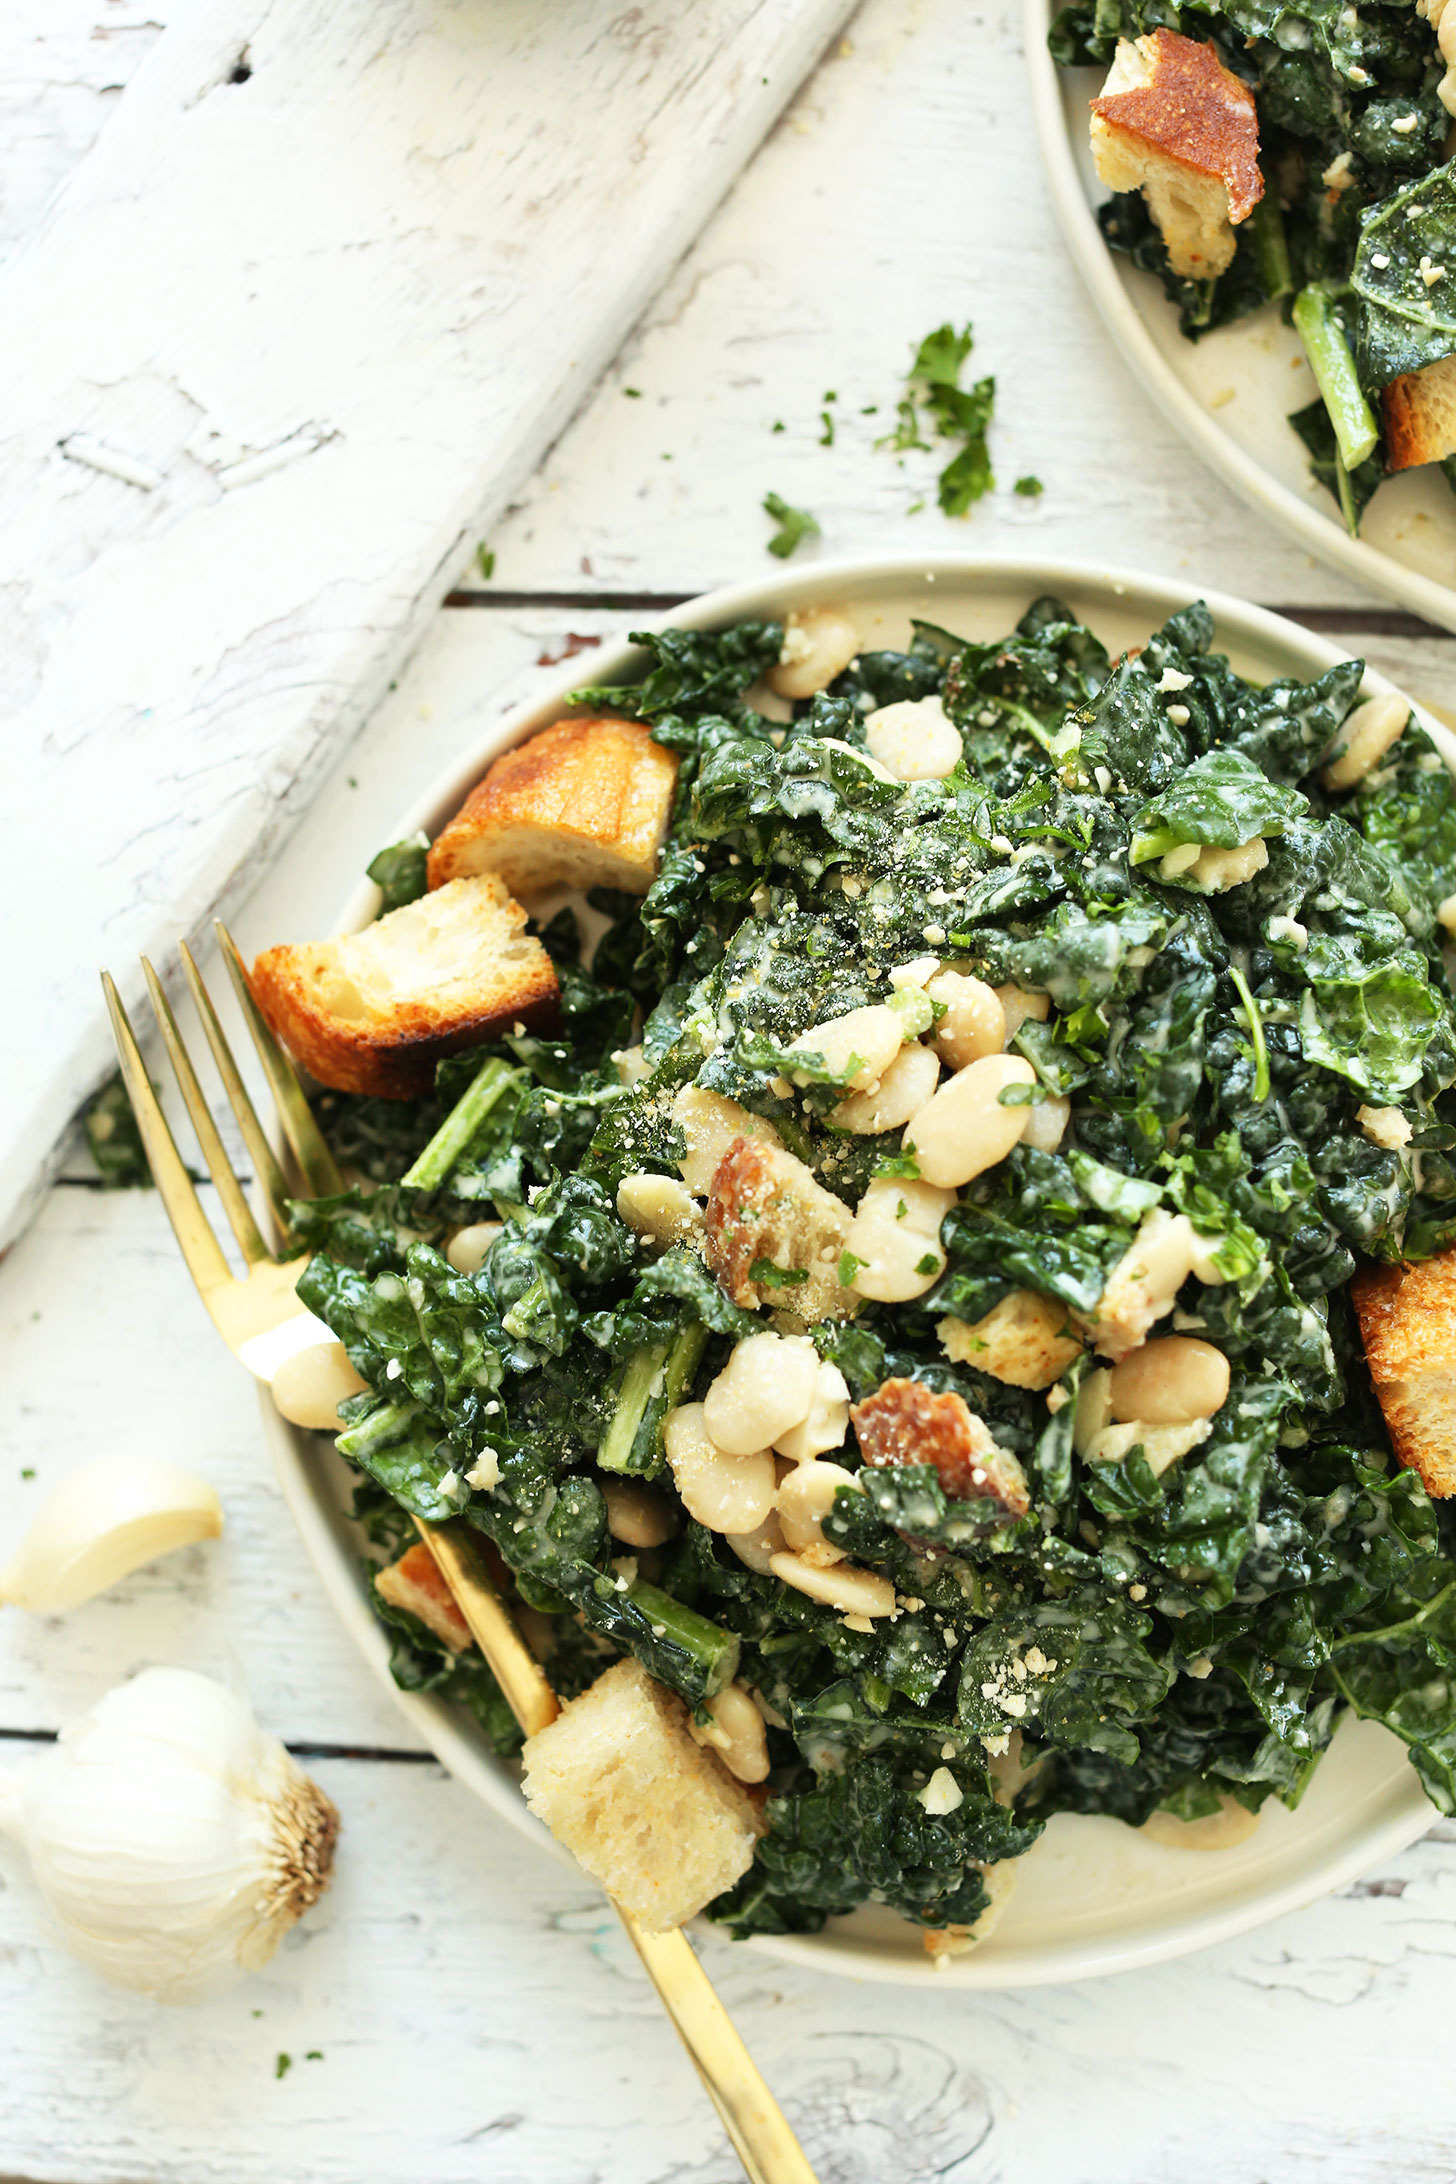 Big plate of our AMAZING Lemony Garlic Kale Salad with Butter Beans and Garlic Croutons